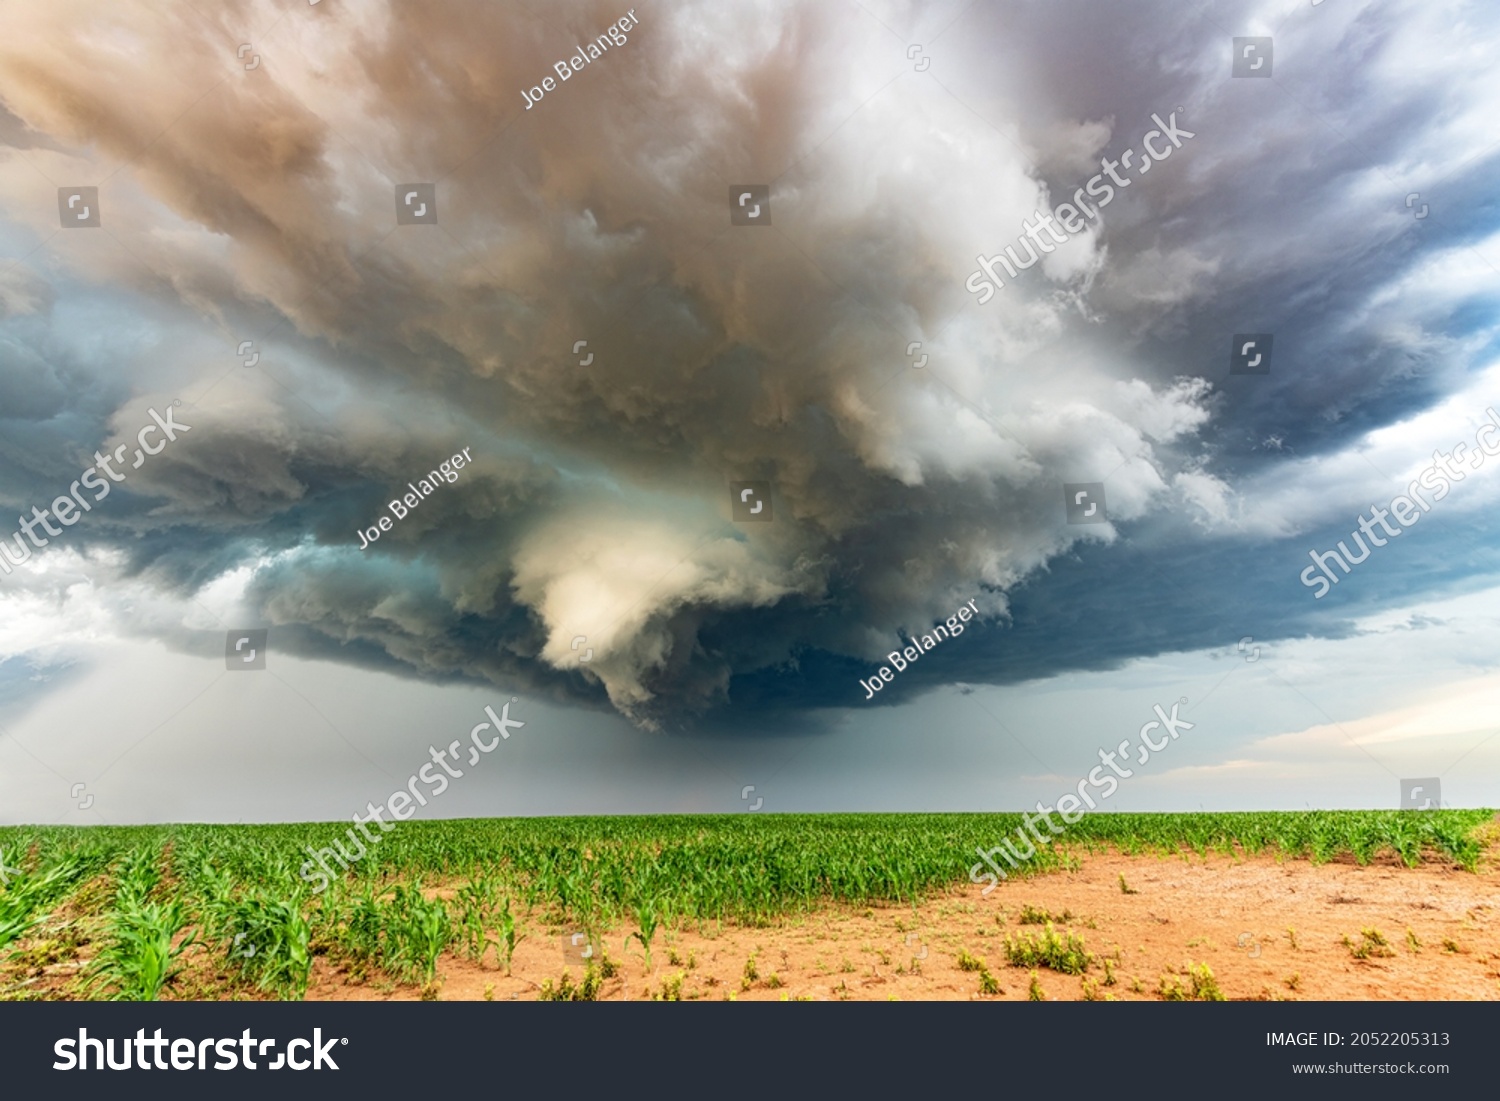 Panorama of a massive mesocyclone weather supercell, which is a pre-tornado stage, passes over a grassy part of the Great Plains while fiercely trying to form a tornado. #2052205313